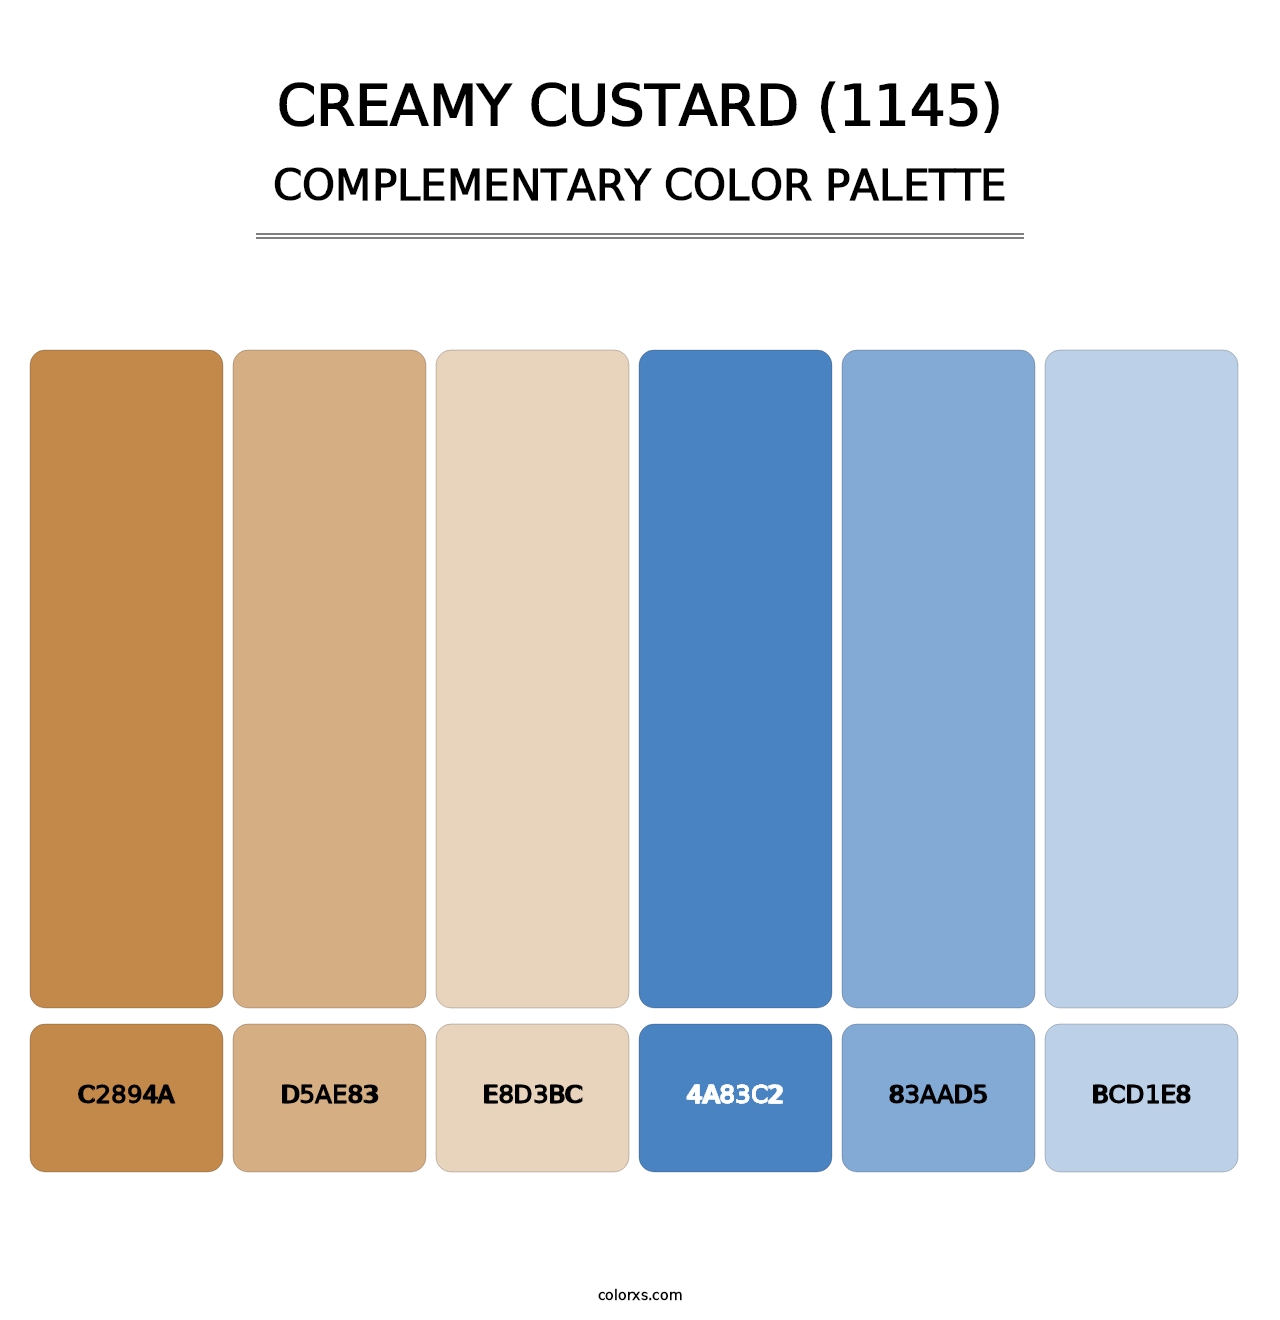 Creamy Custard (1145) - Complementary Color Palette